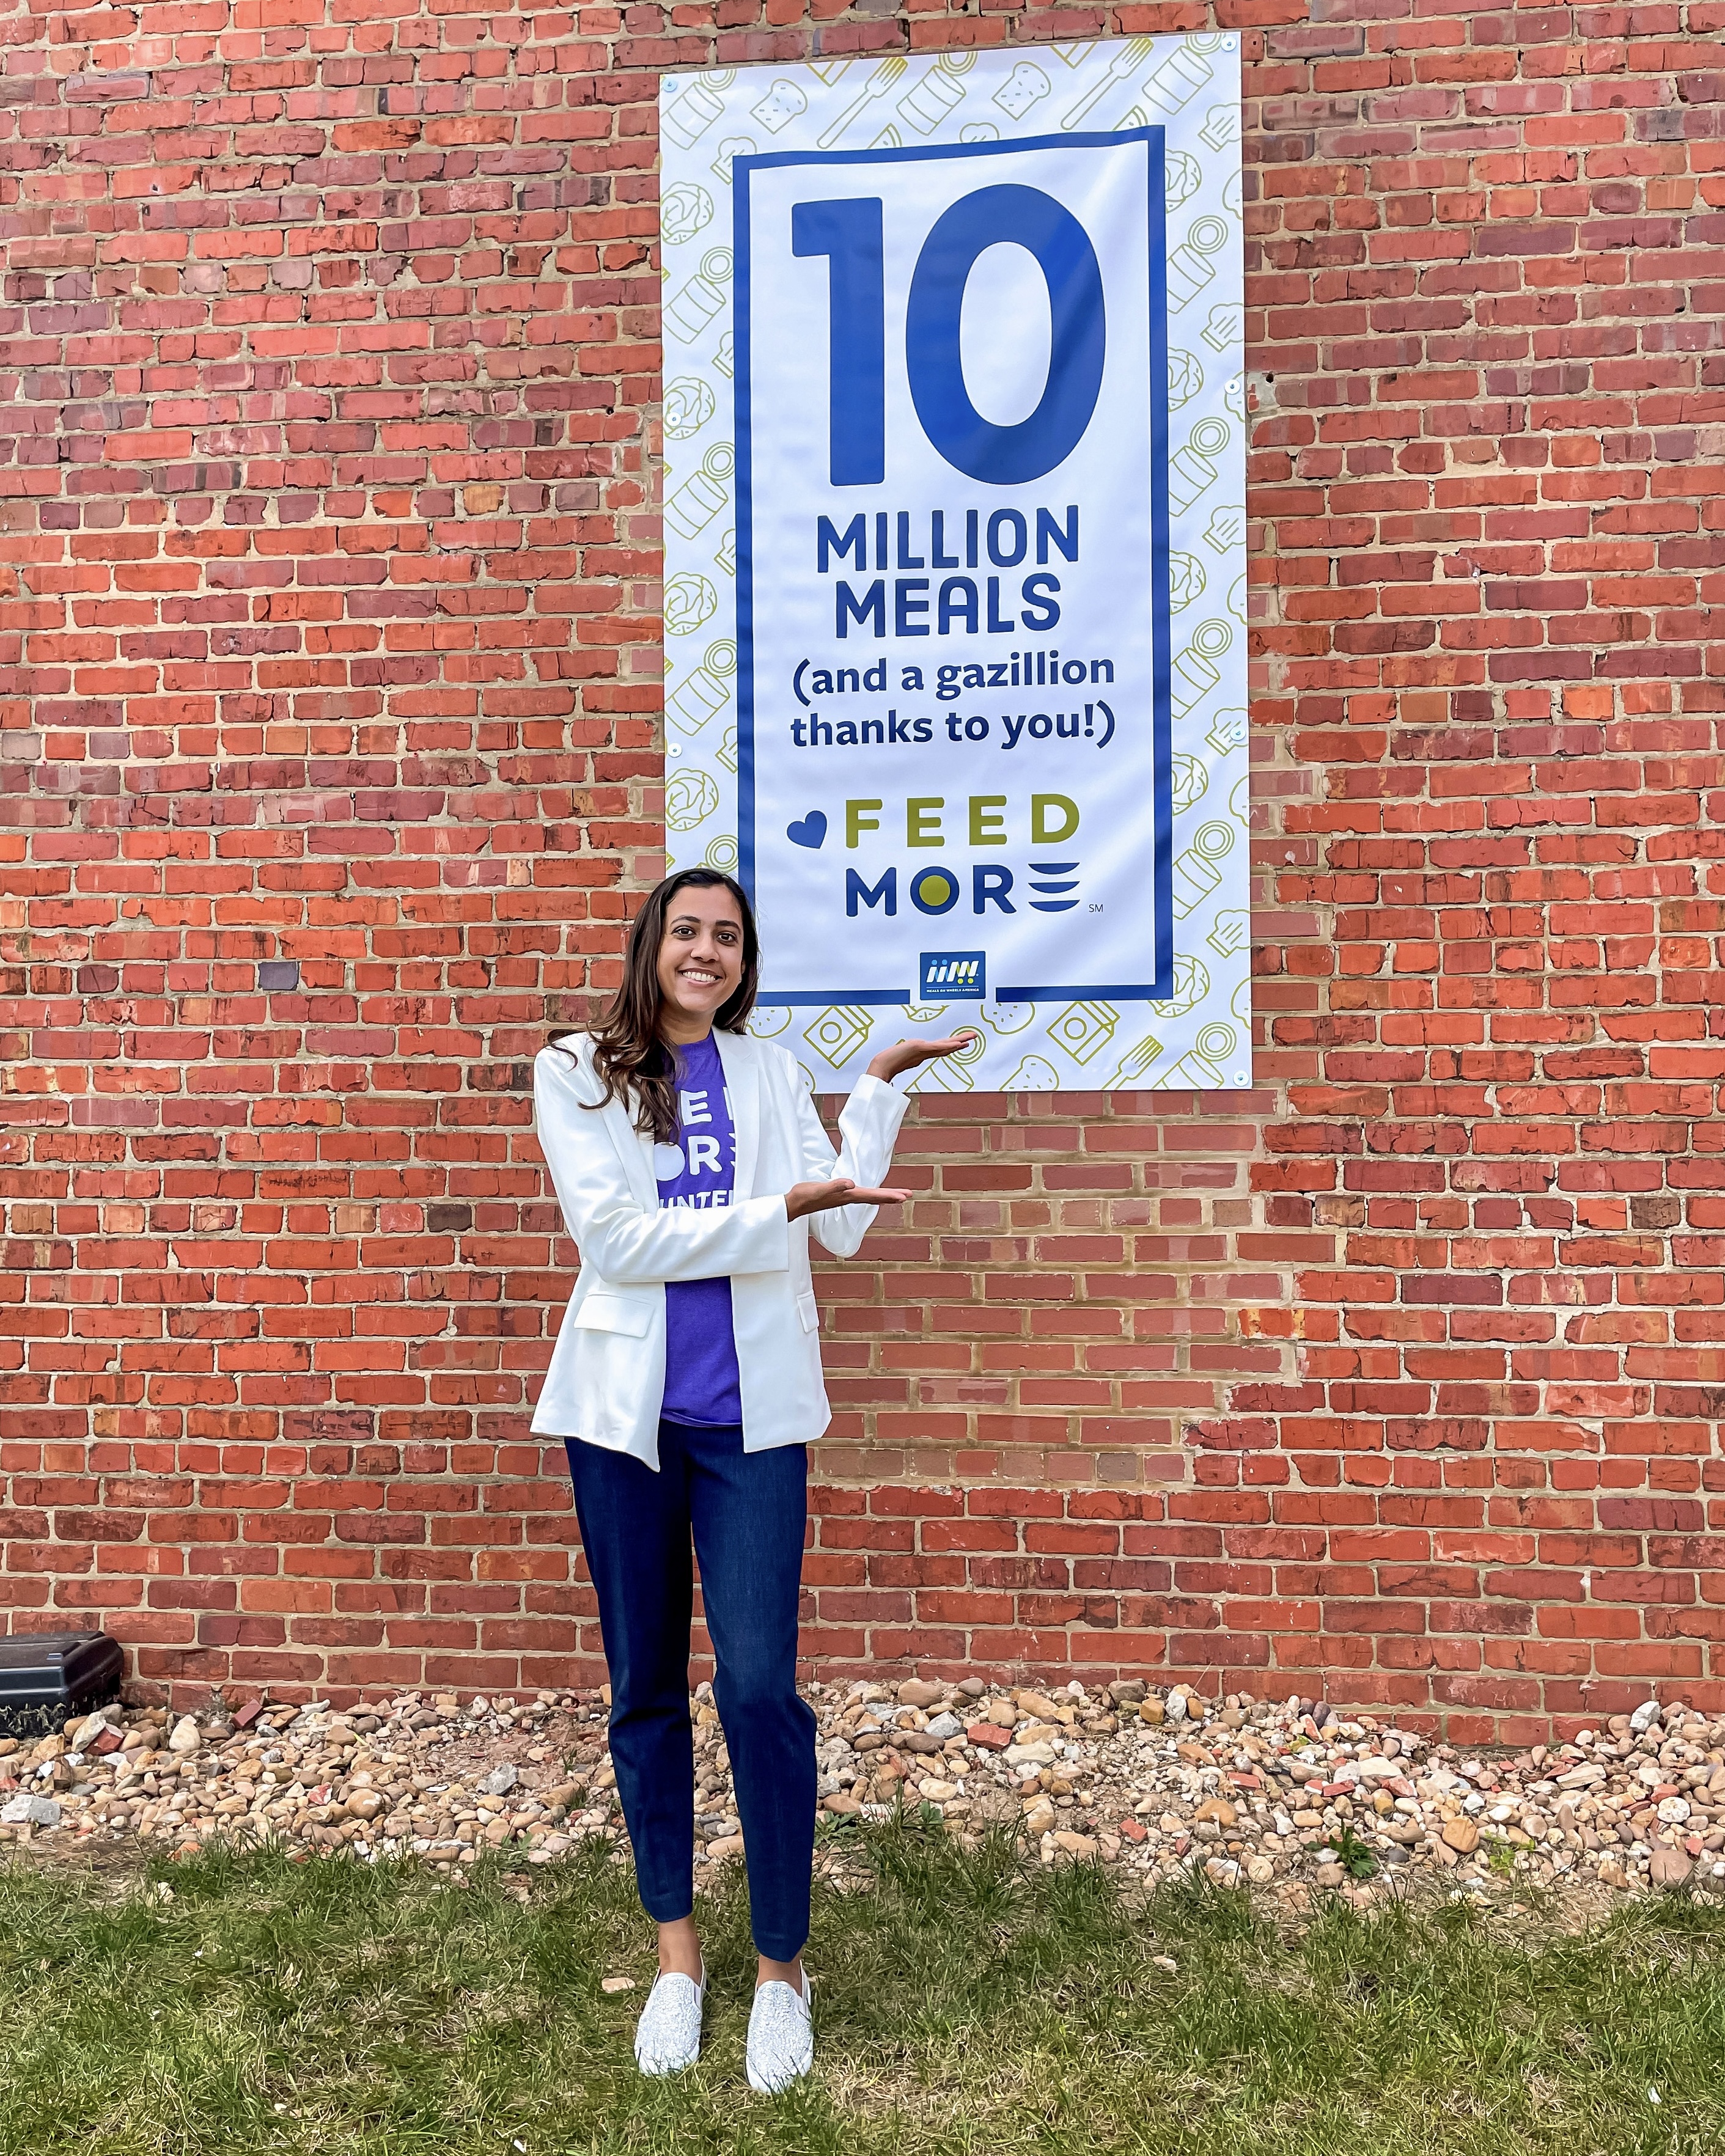  Sonya Feeser was featured in Richmond Magazine after being selected to deliver Feed More's Meals on Wheels 10 millionth meal. 